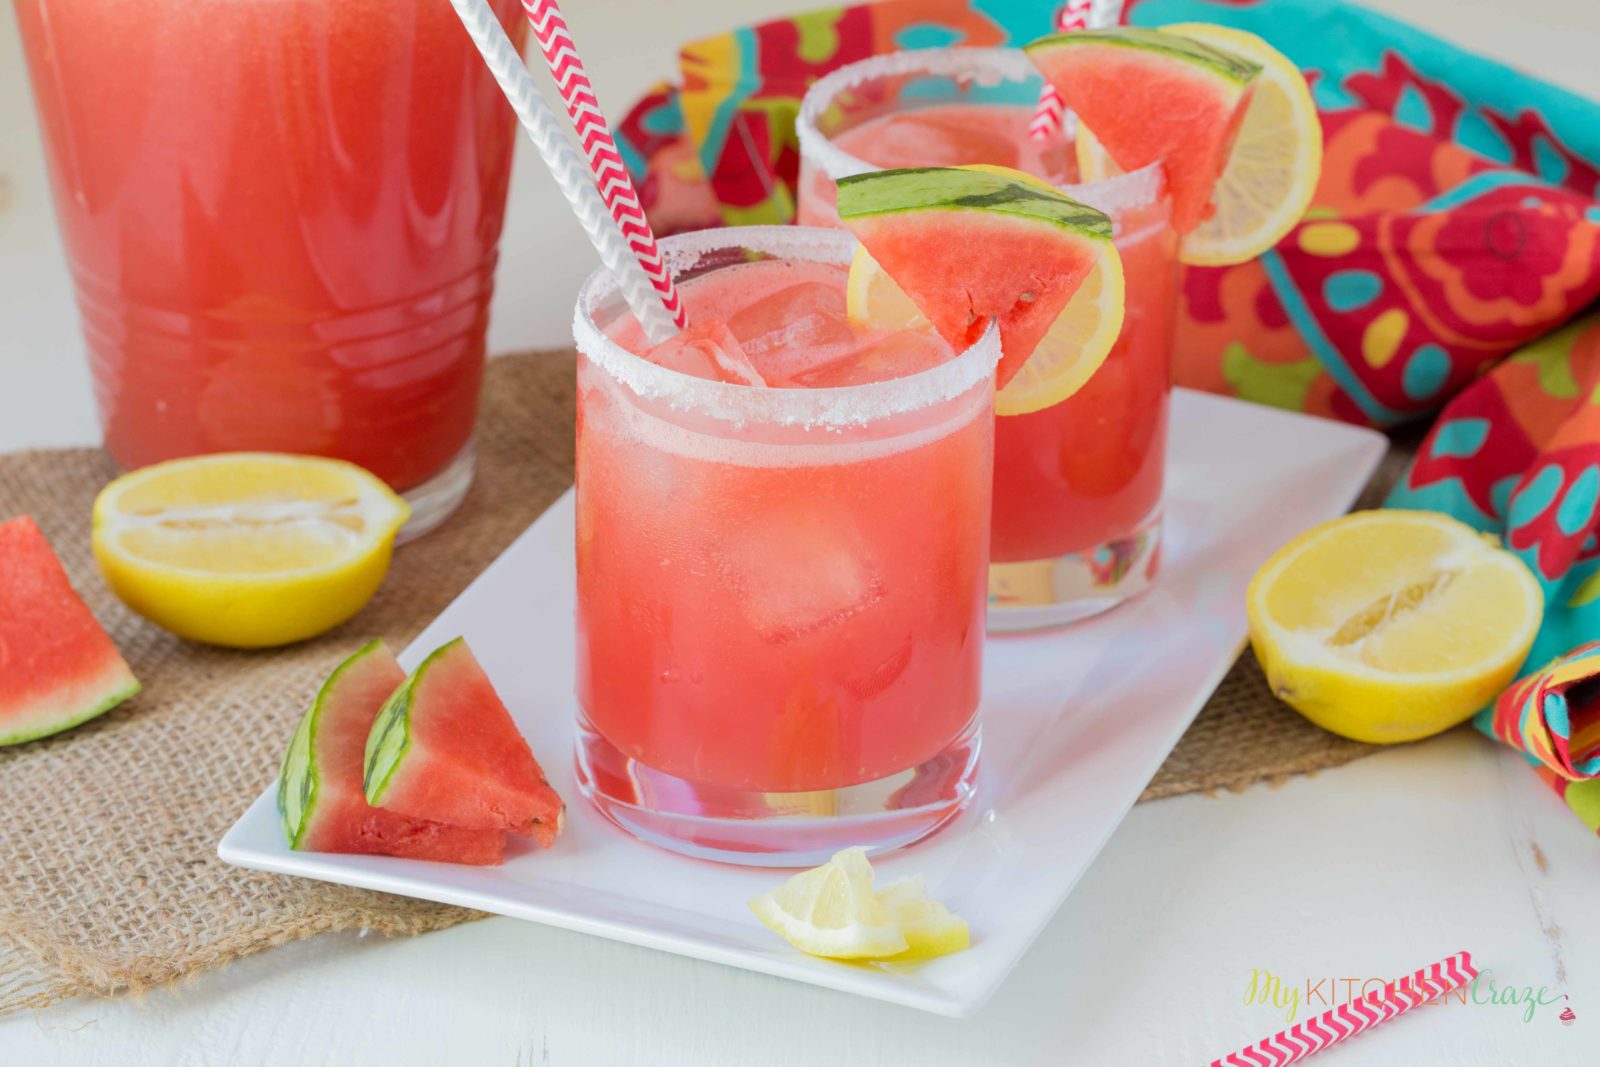 Spiked Watermelon Lemonade ~ mykitchencraze.com ~ This drink is a delicious blend of watermelon, frozen lemonade and vodka. This is one adult drink you won't want to pass up this summer!